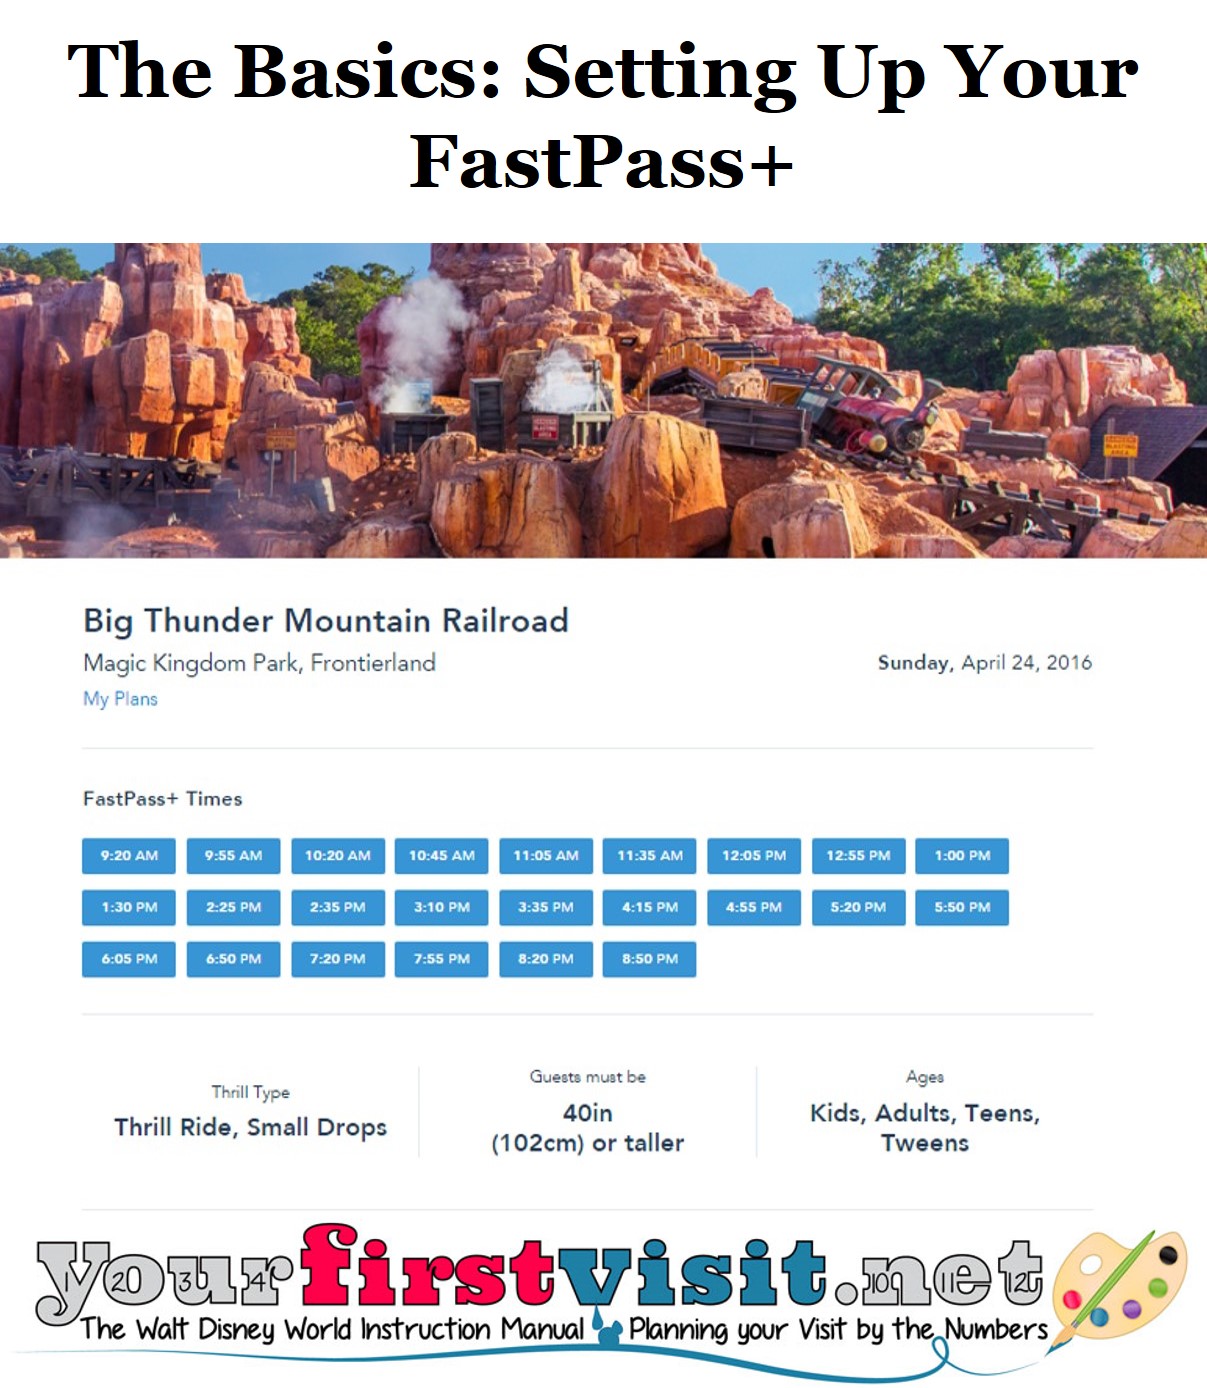 The Basics - Setting Up Your FastPass+ from yourfirstvisit.net